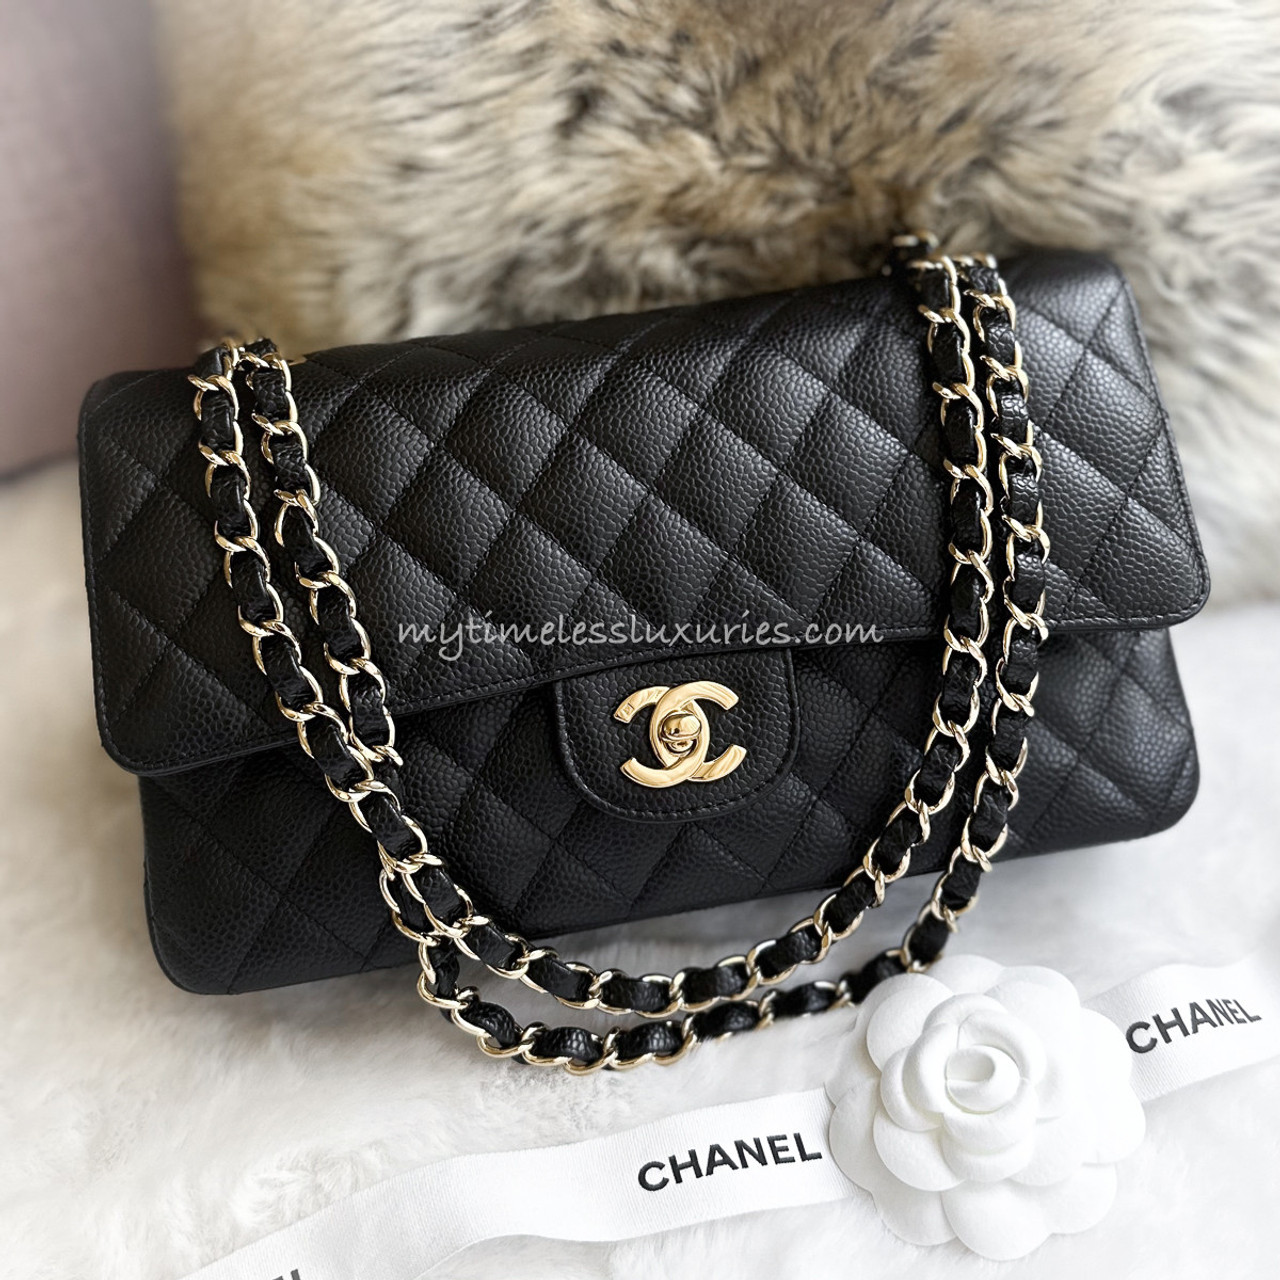 myluxurydesignerbranded  Good Condition Authentic Chanel Classic Medium  25cm Red Caviar Silver Hardware Flap Bag series 14 with Holo Sticker  Dust  Bag RM13xxx only Follow Our Ig Account luxurydesignerbrandeds  luxurydesignerbranded2